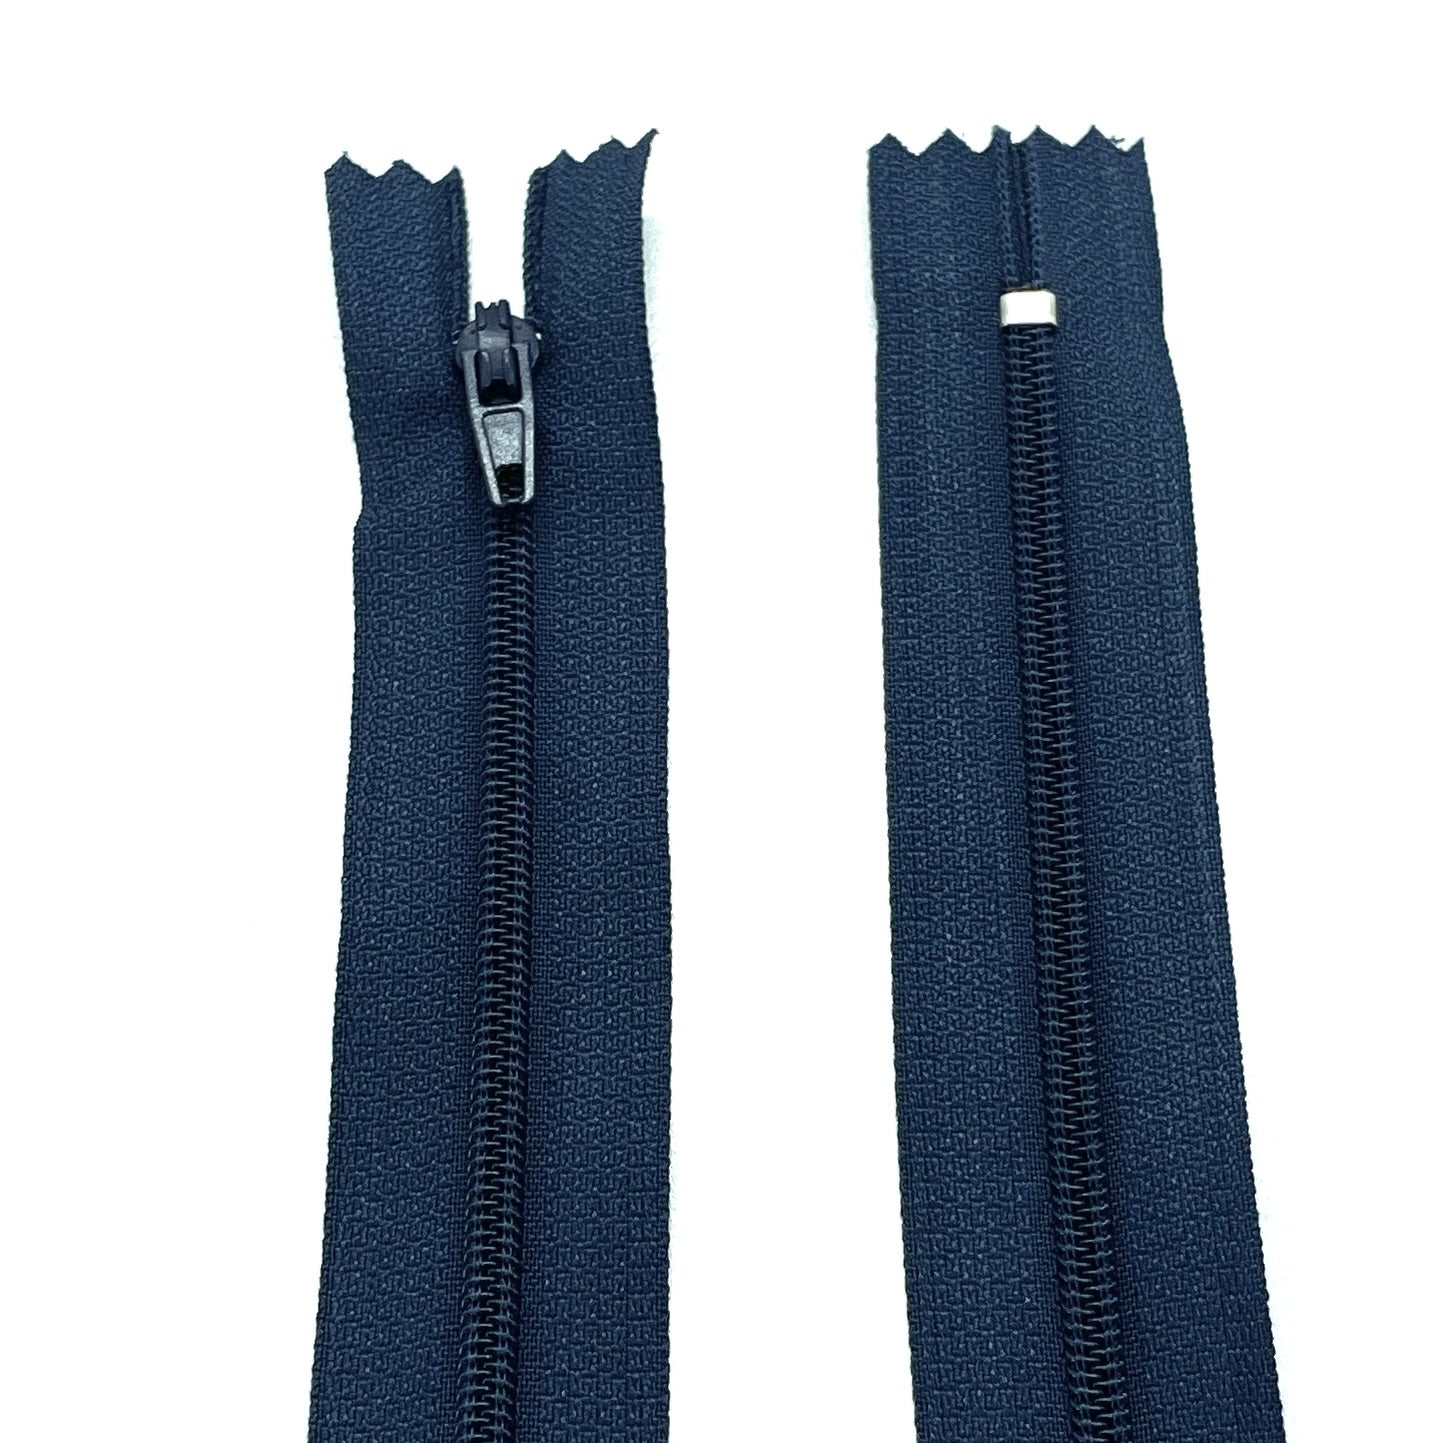 Photo of navy nylon zips available in 25 colors and 5 sizes. Excellent quality zippers for craft and dressmaking purposes. Perfect for dresses, skirts, trousers, bags, purses, cushions, and numerous other projects. So many possibilities, so little time!